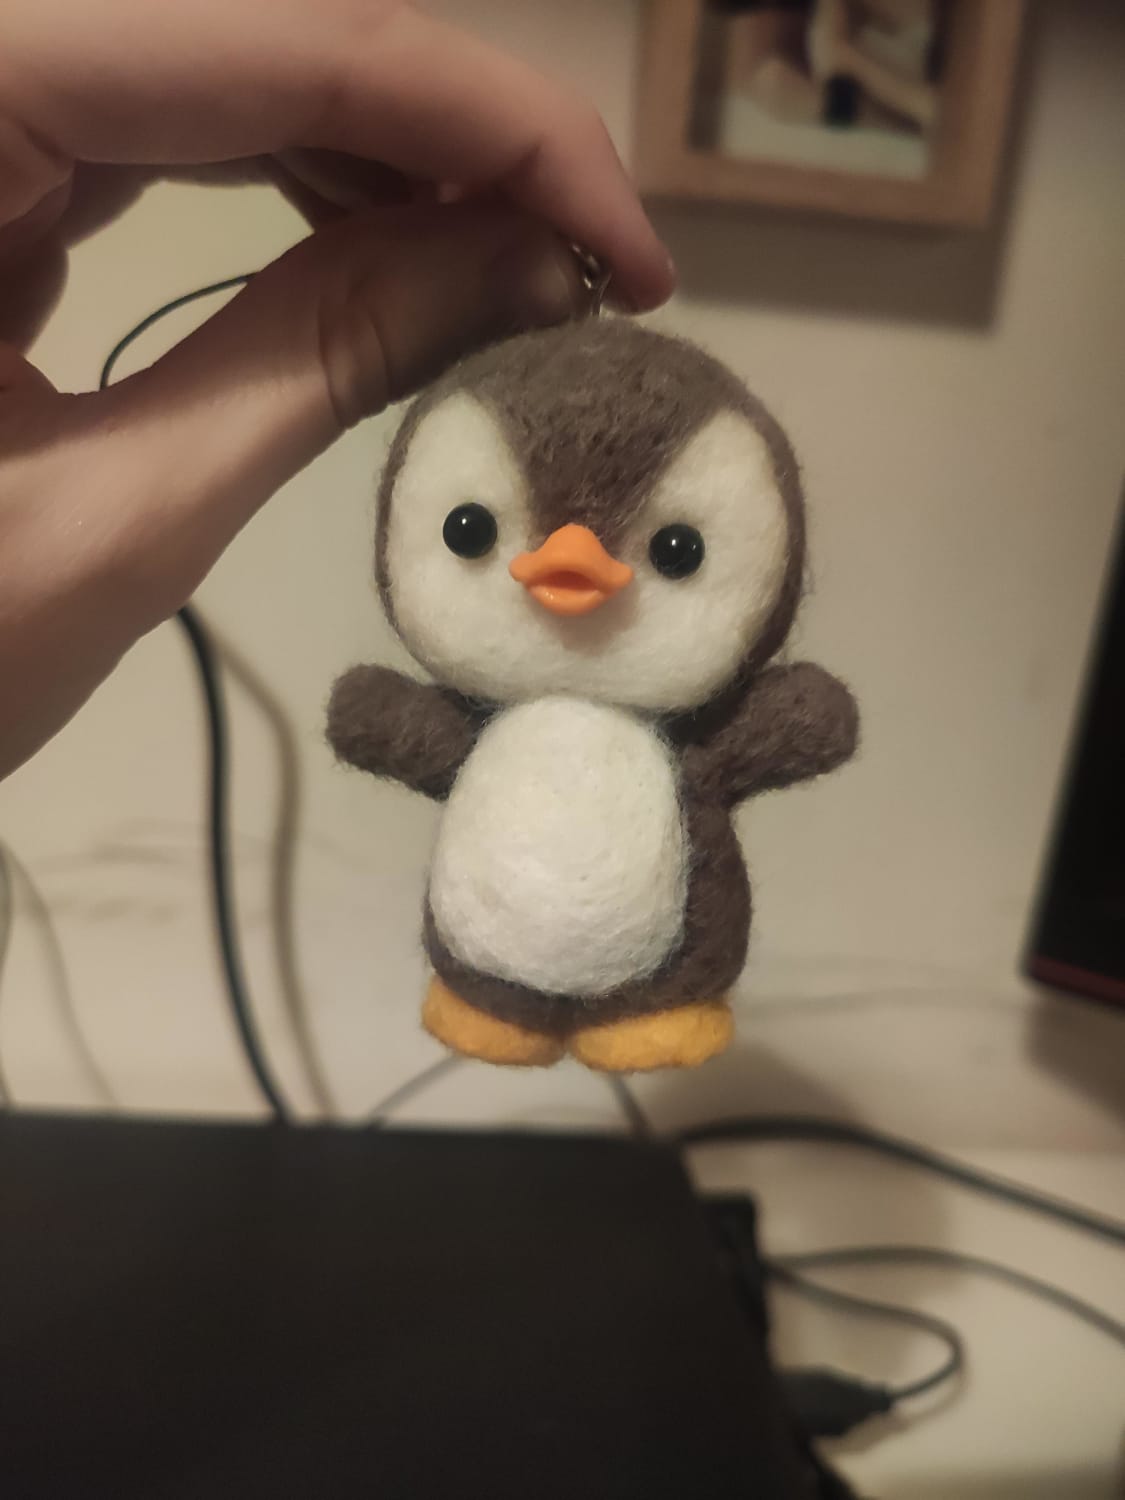 I made this needle felted penguin ❤️ It was really fun